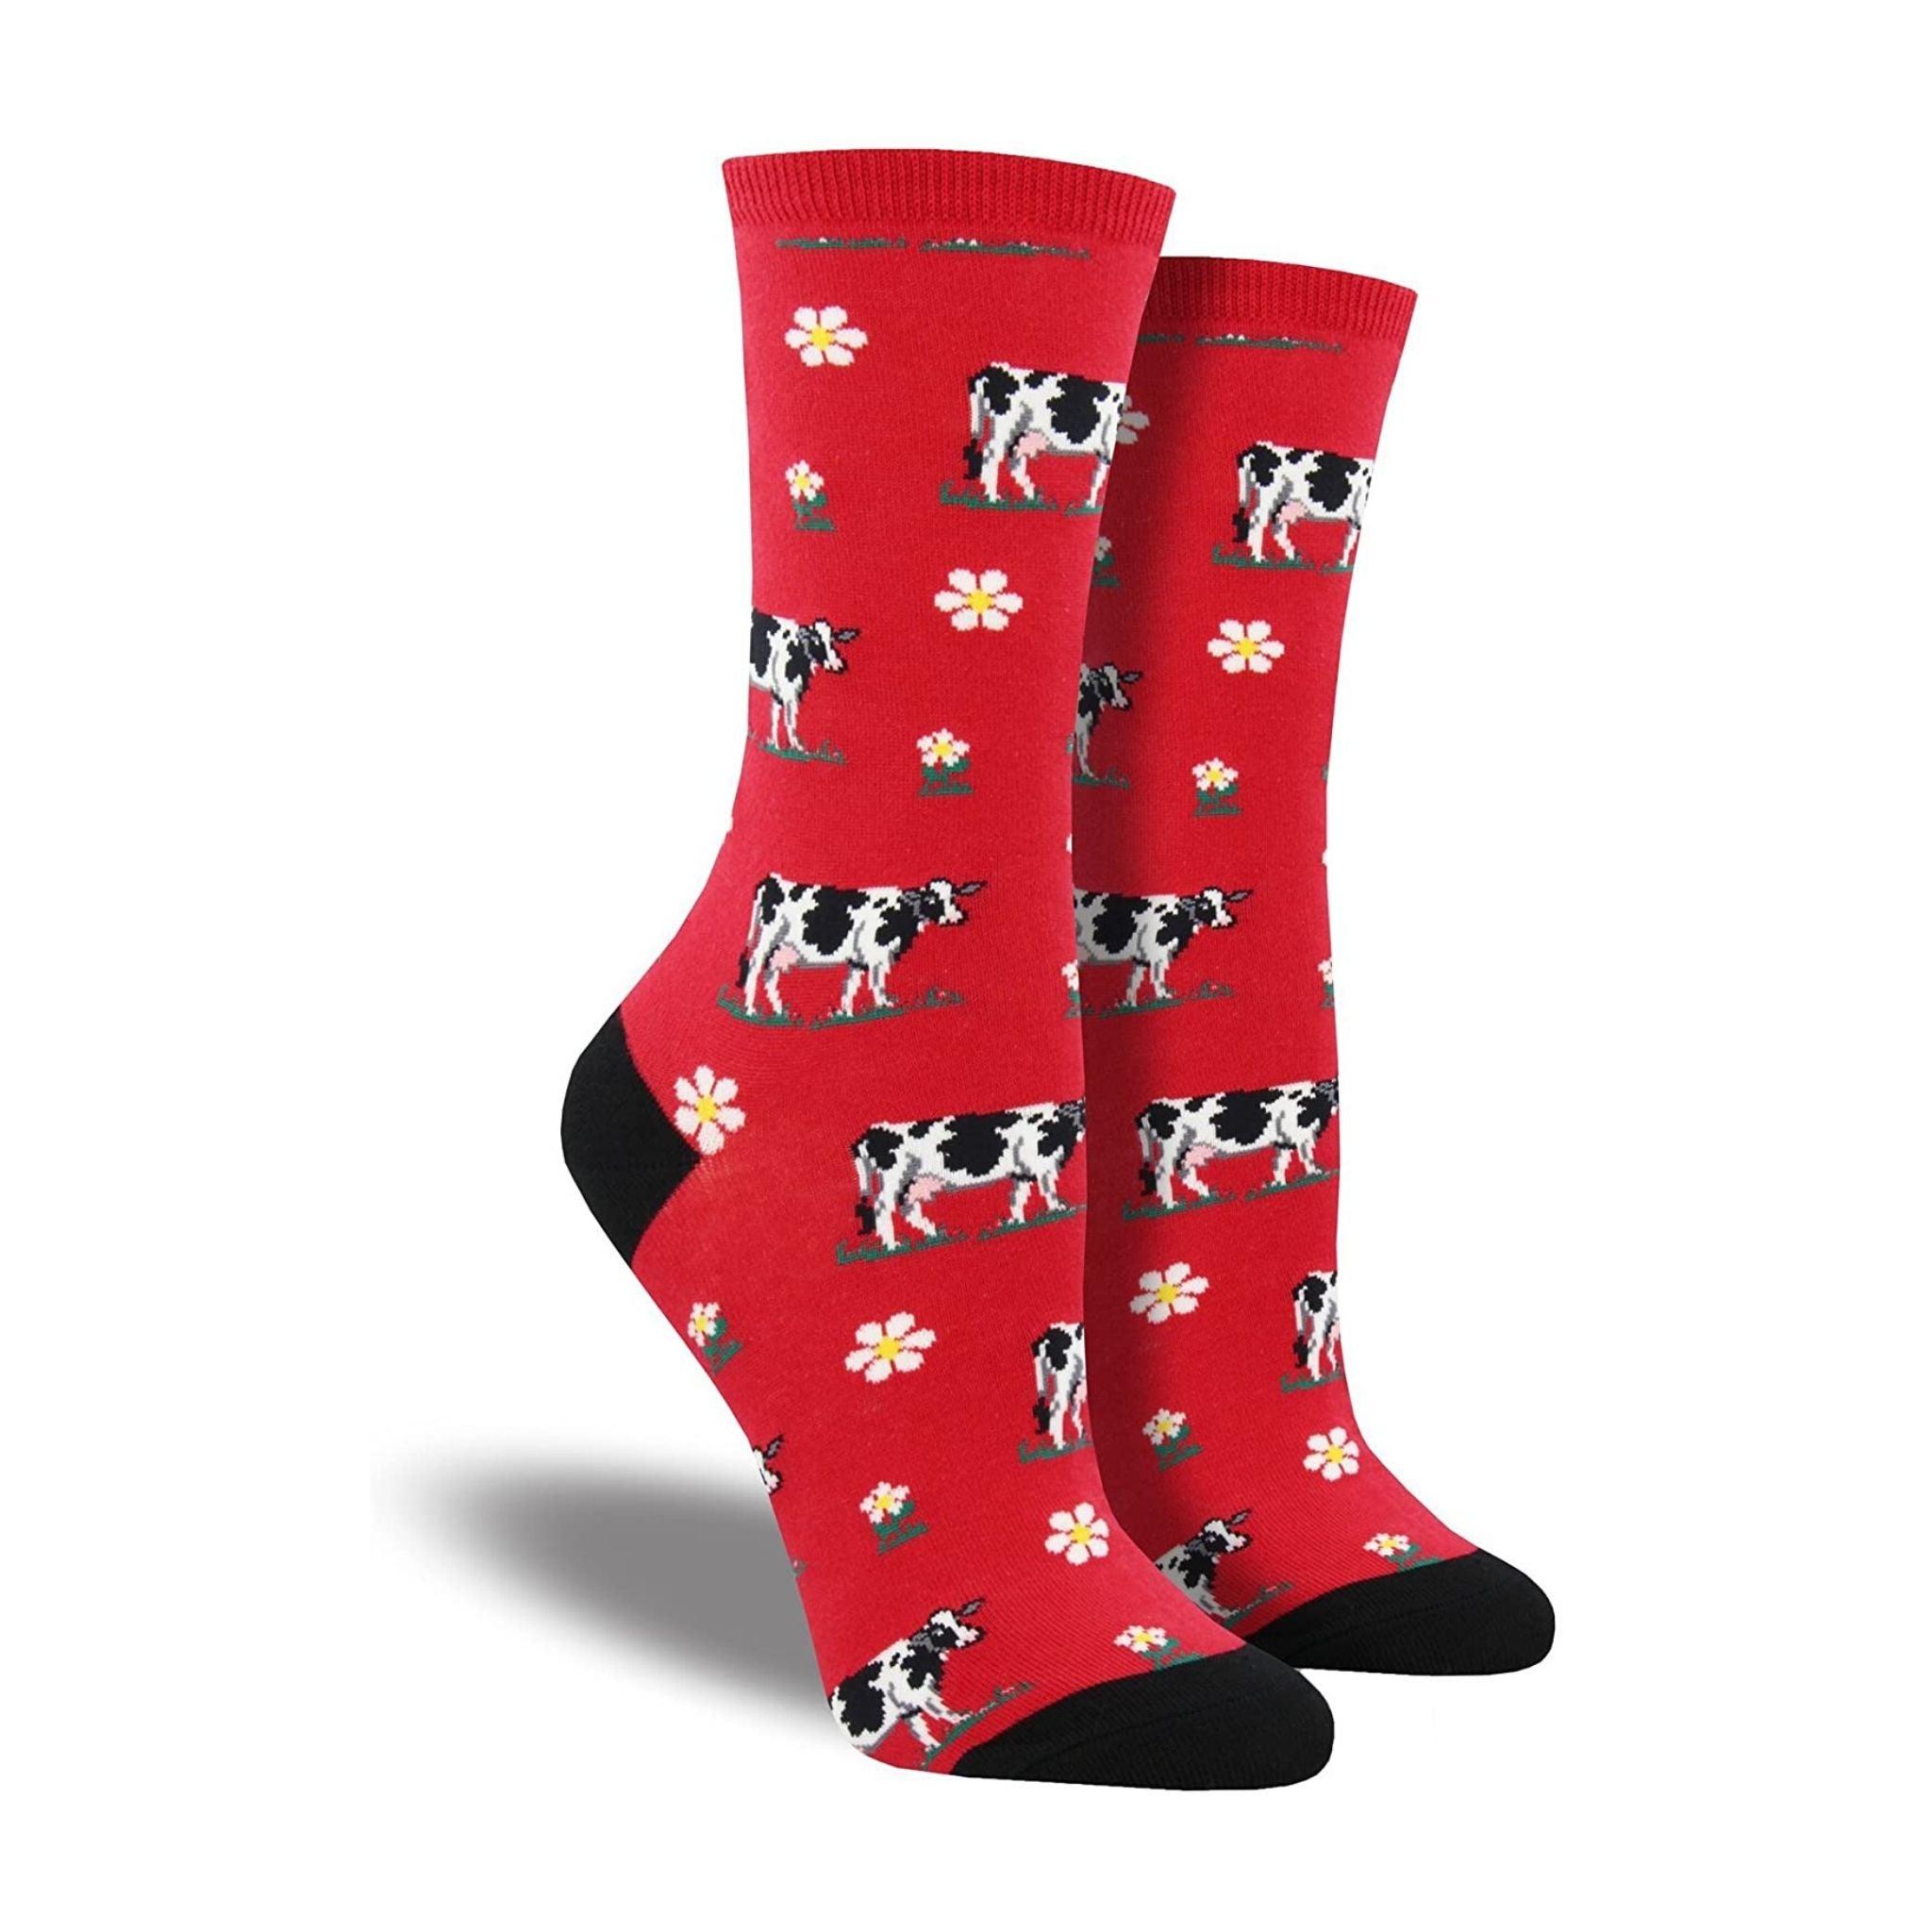 Red socks with dairy cows and daisys on them